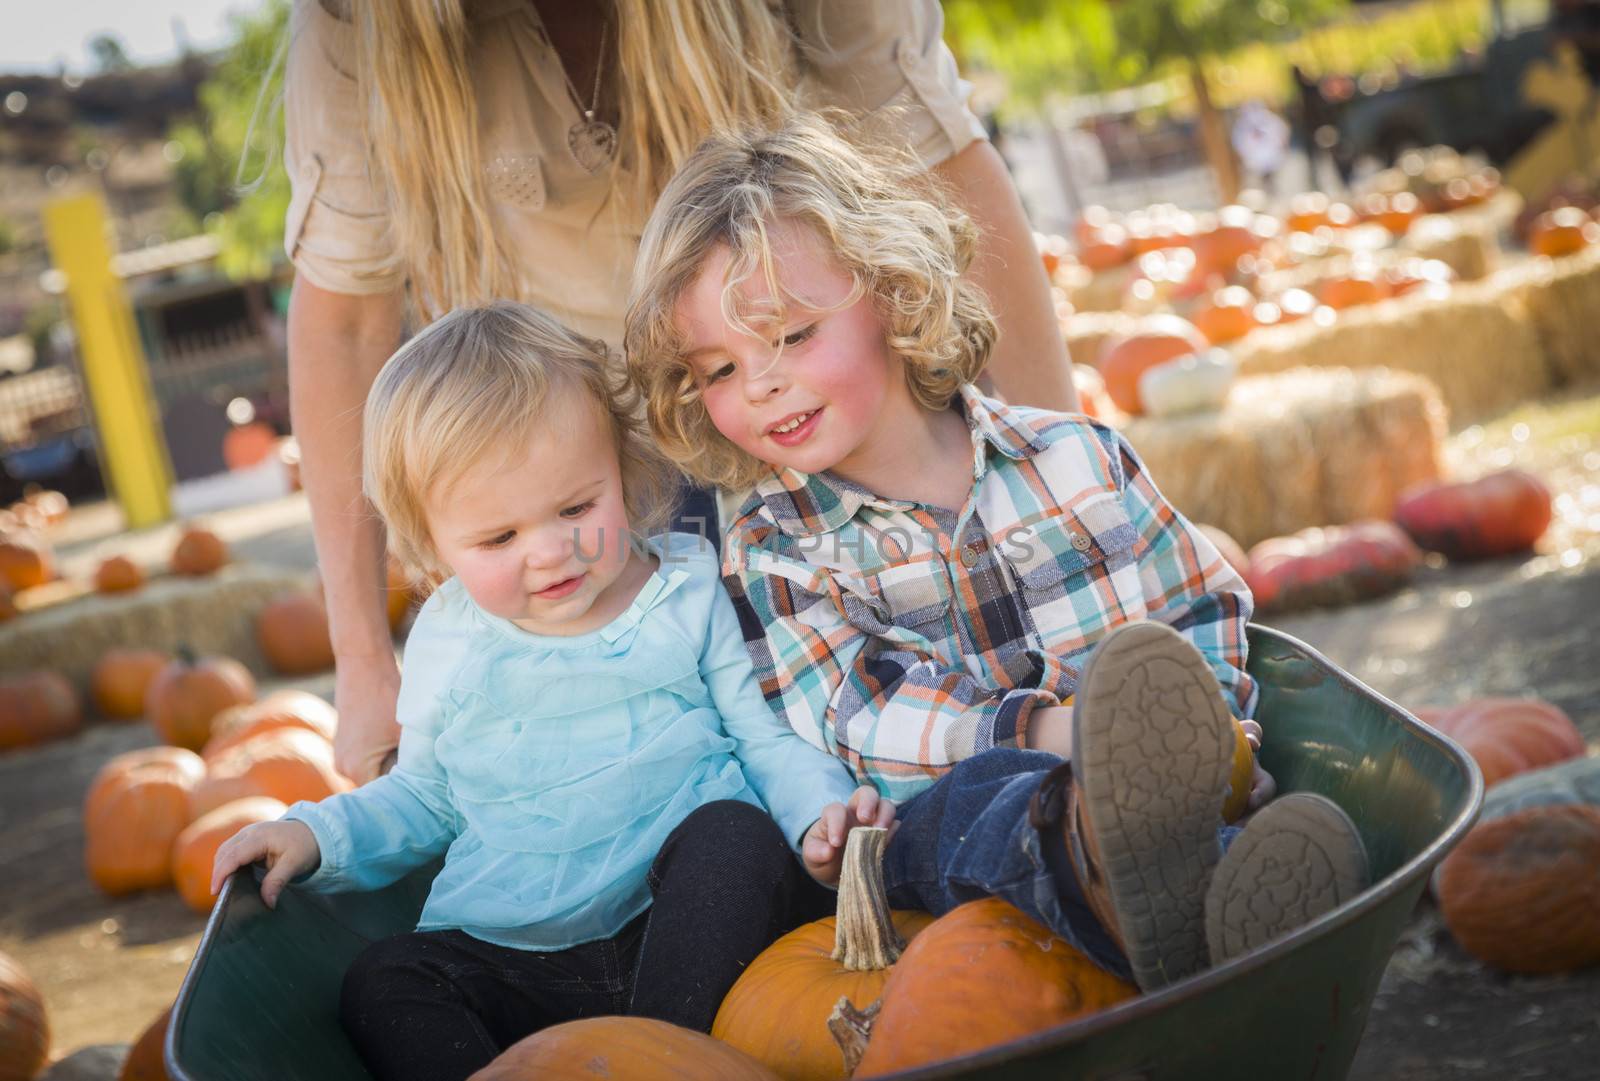 Adorable Young Family Enjoys a Day at the Pumpkin Patch.